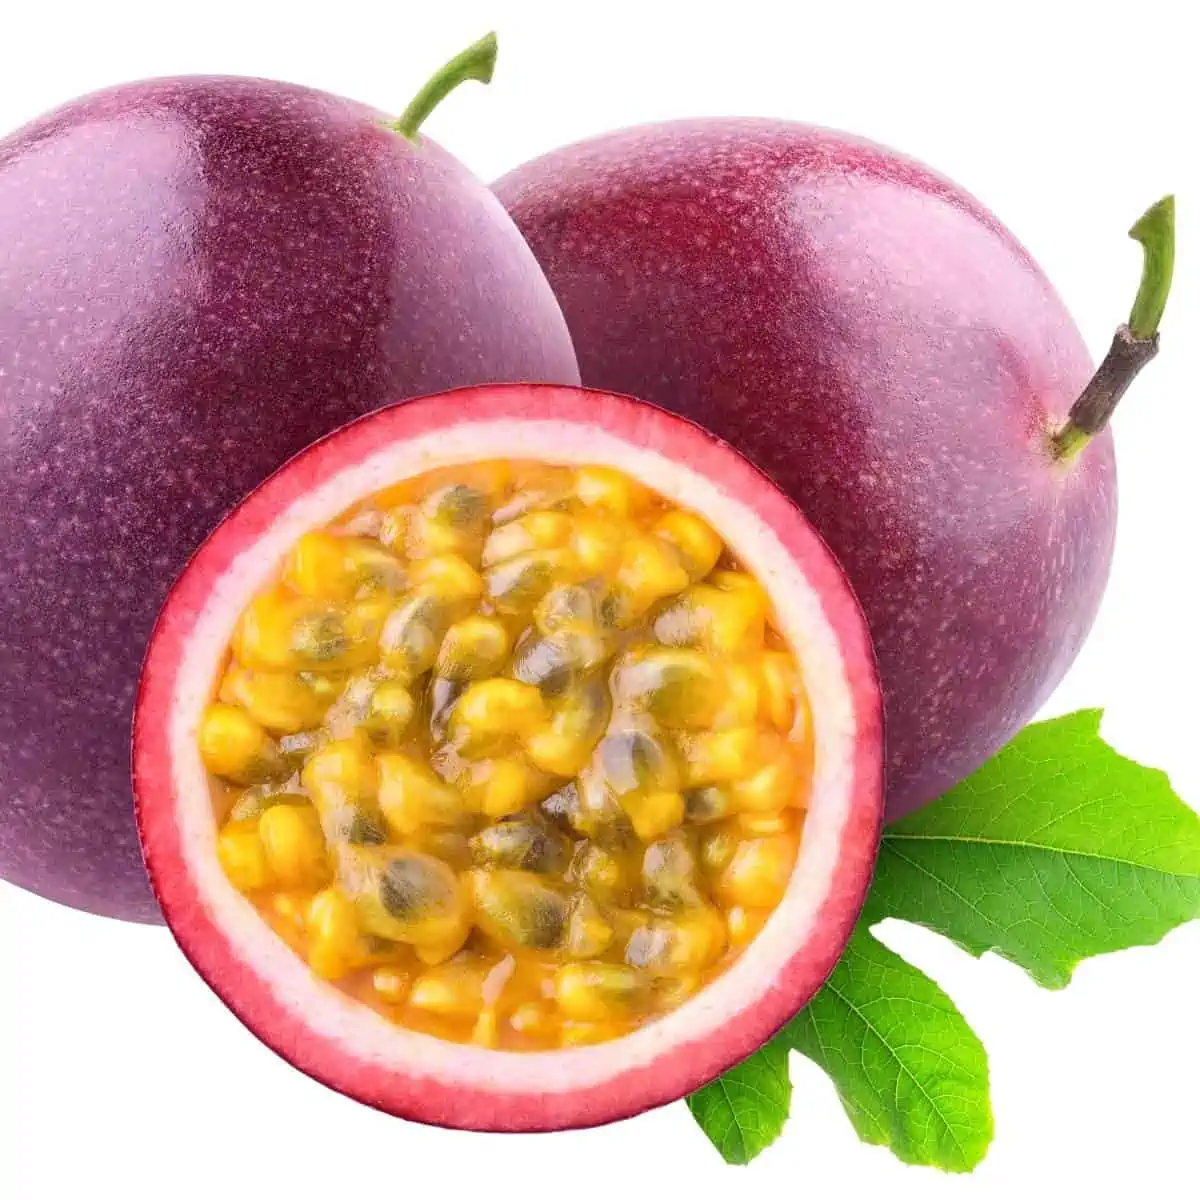 a perfect pink passionfruit bursting with yellow lilikoi seeds